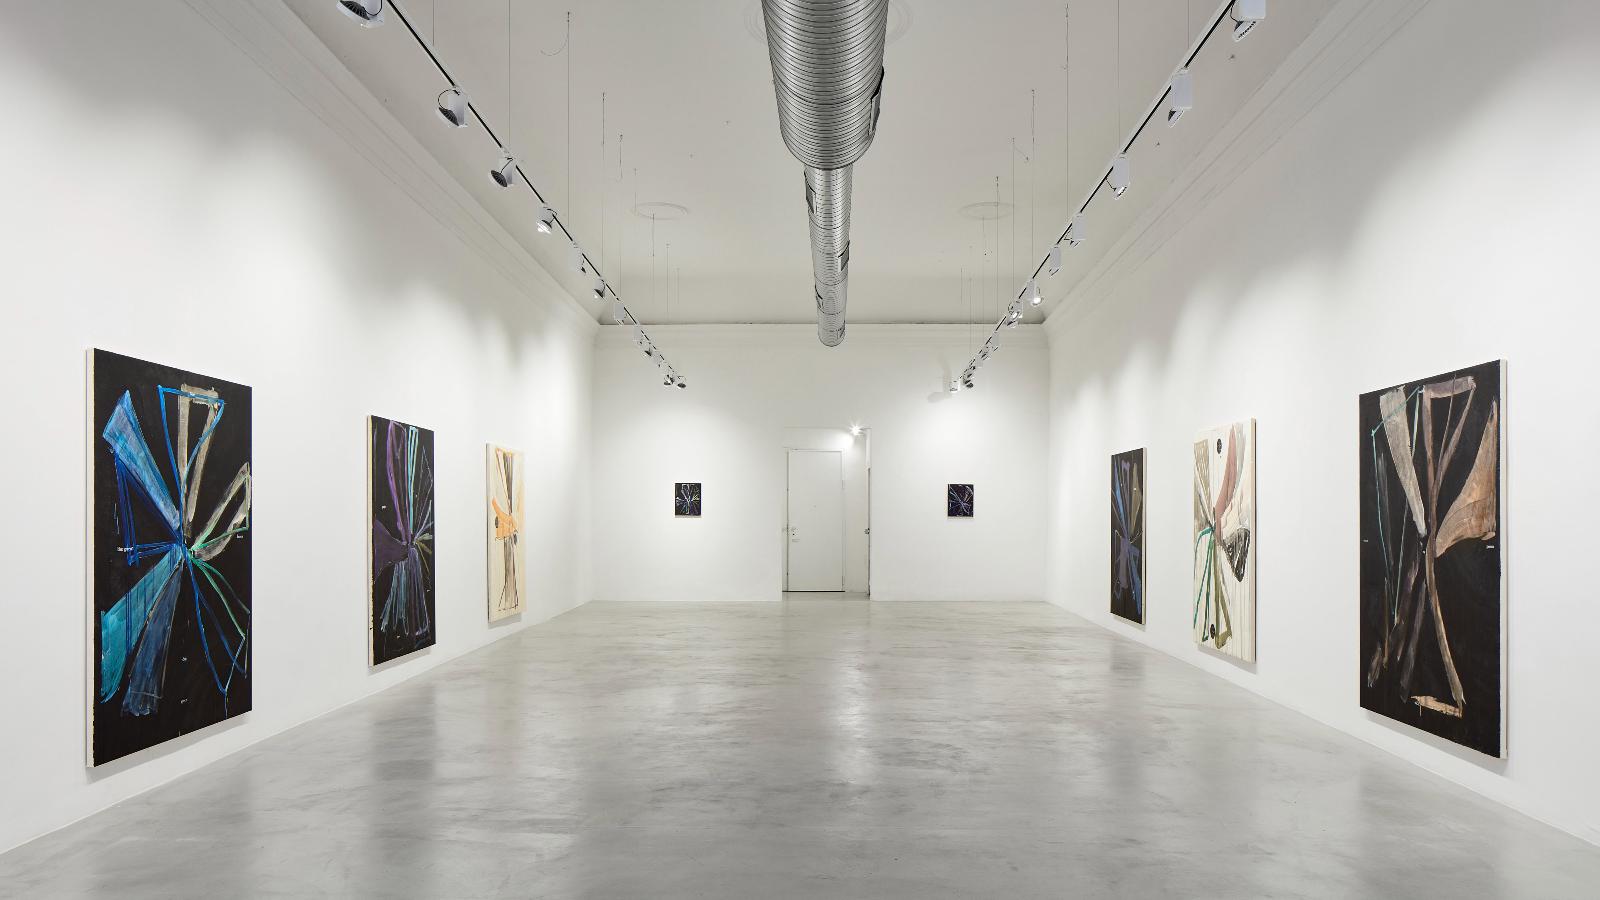 Henry Chapman, Prudent triangle, Installation view, Labs Contemporary Art